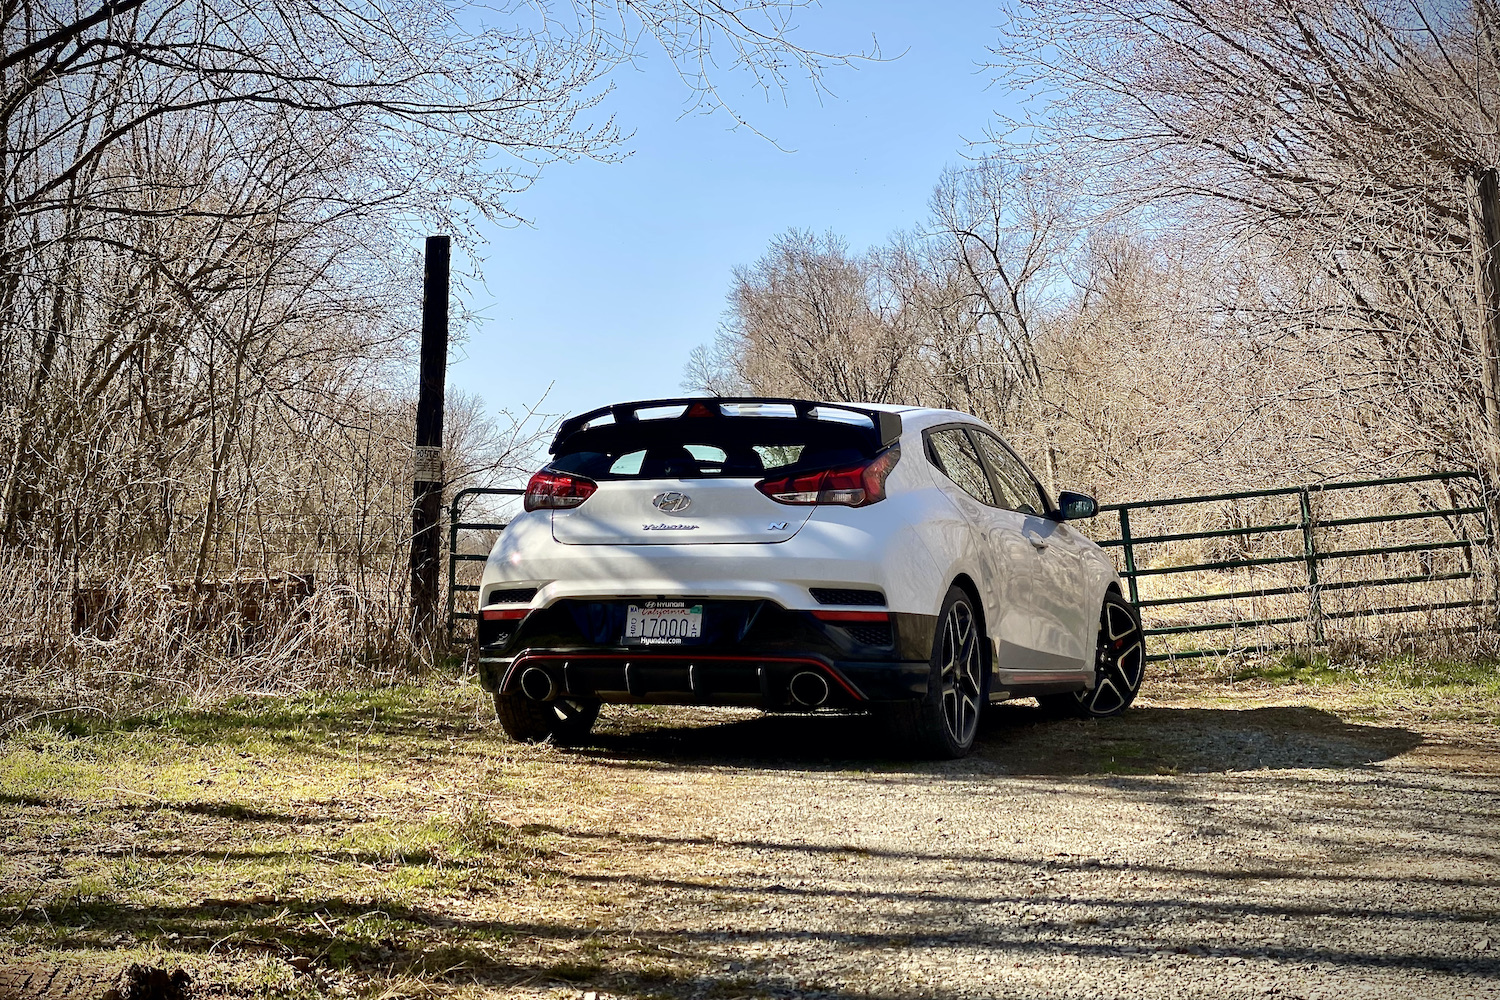 Hyundai Veloster N rear end from passenger side in front of a fence.